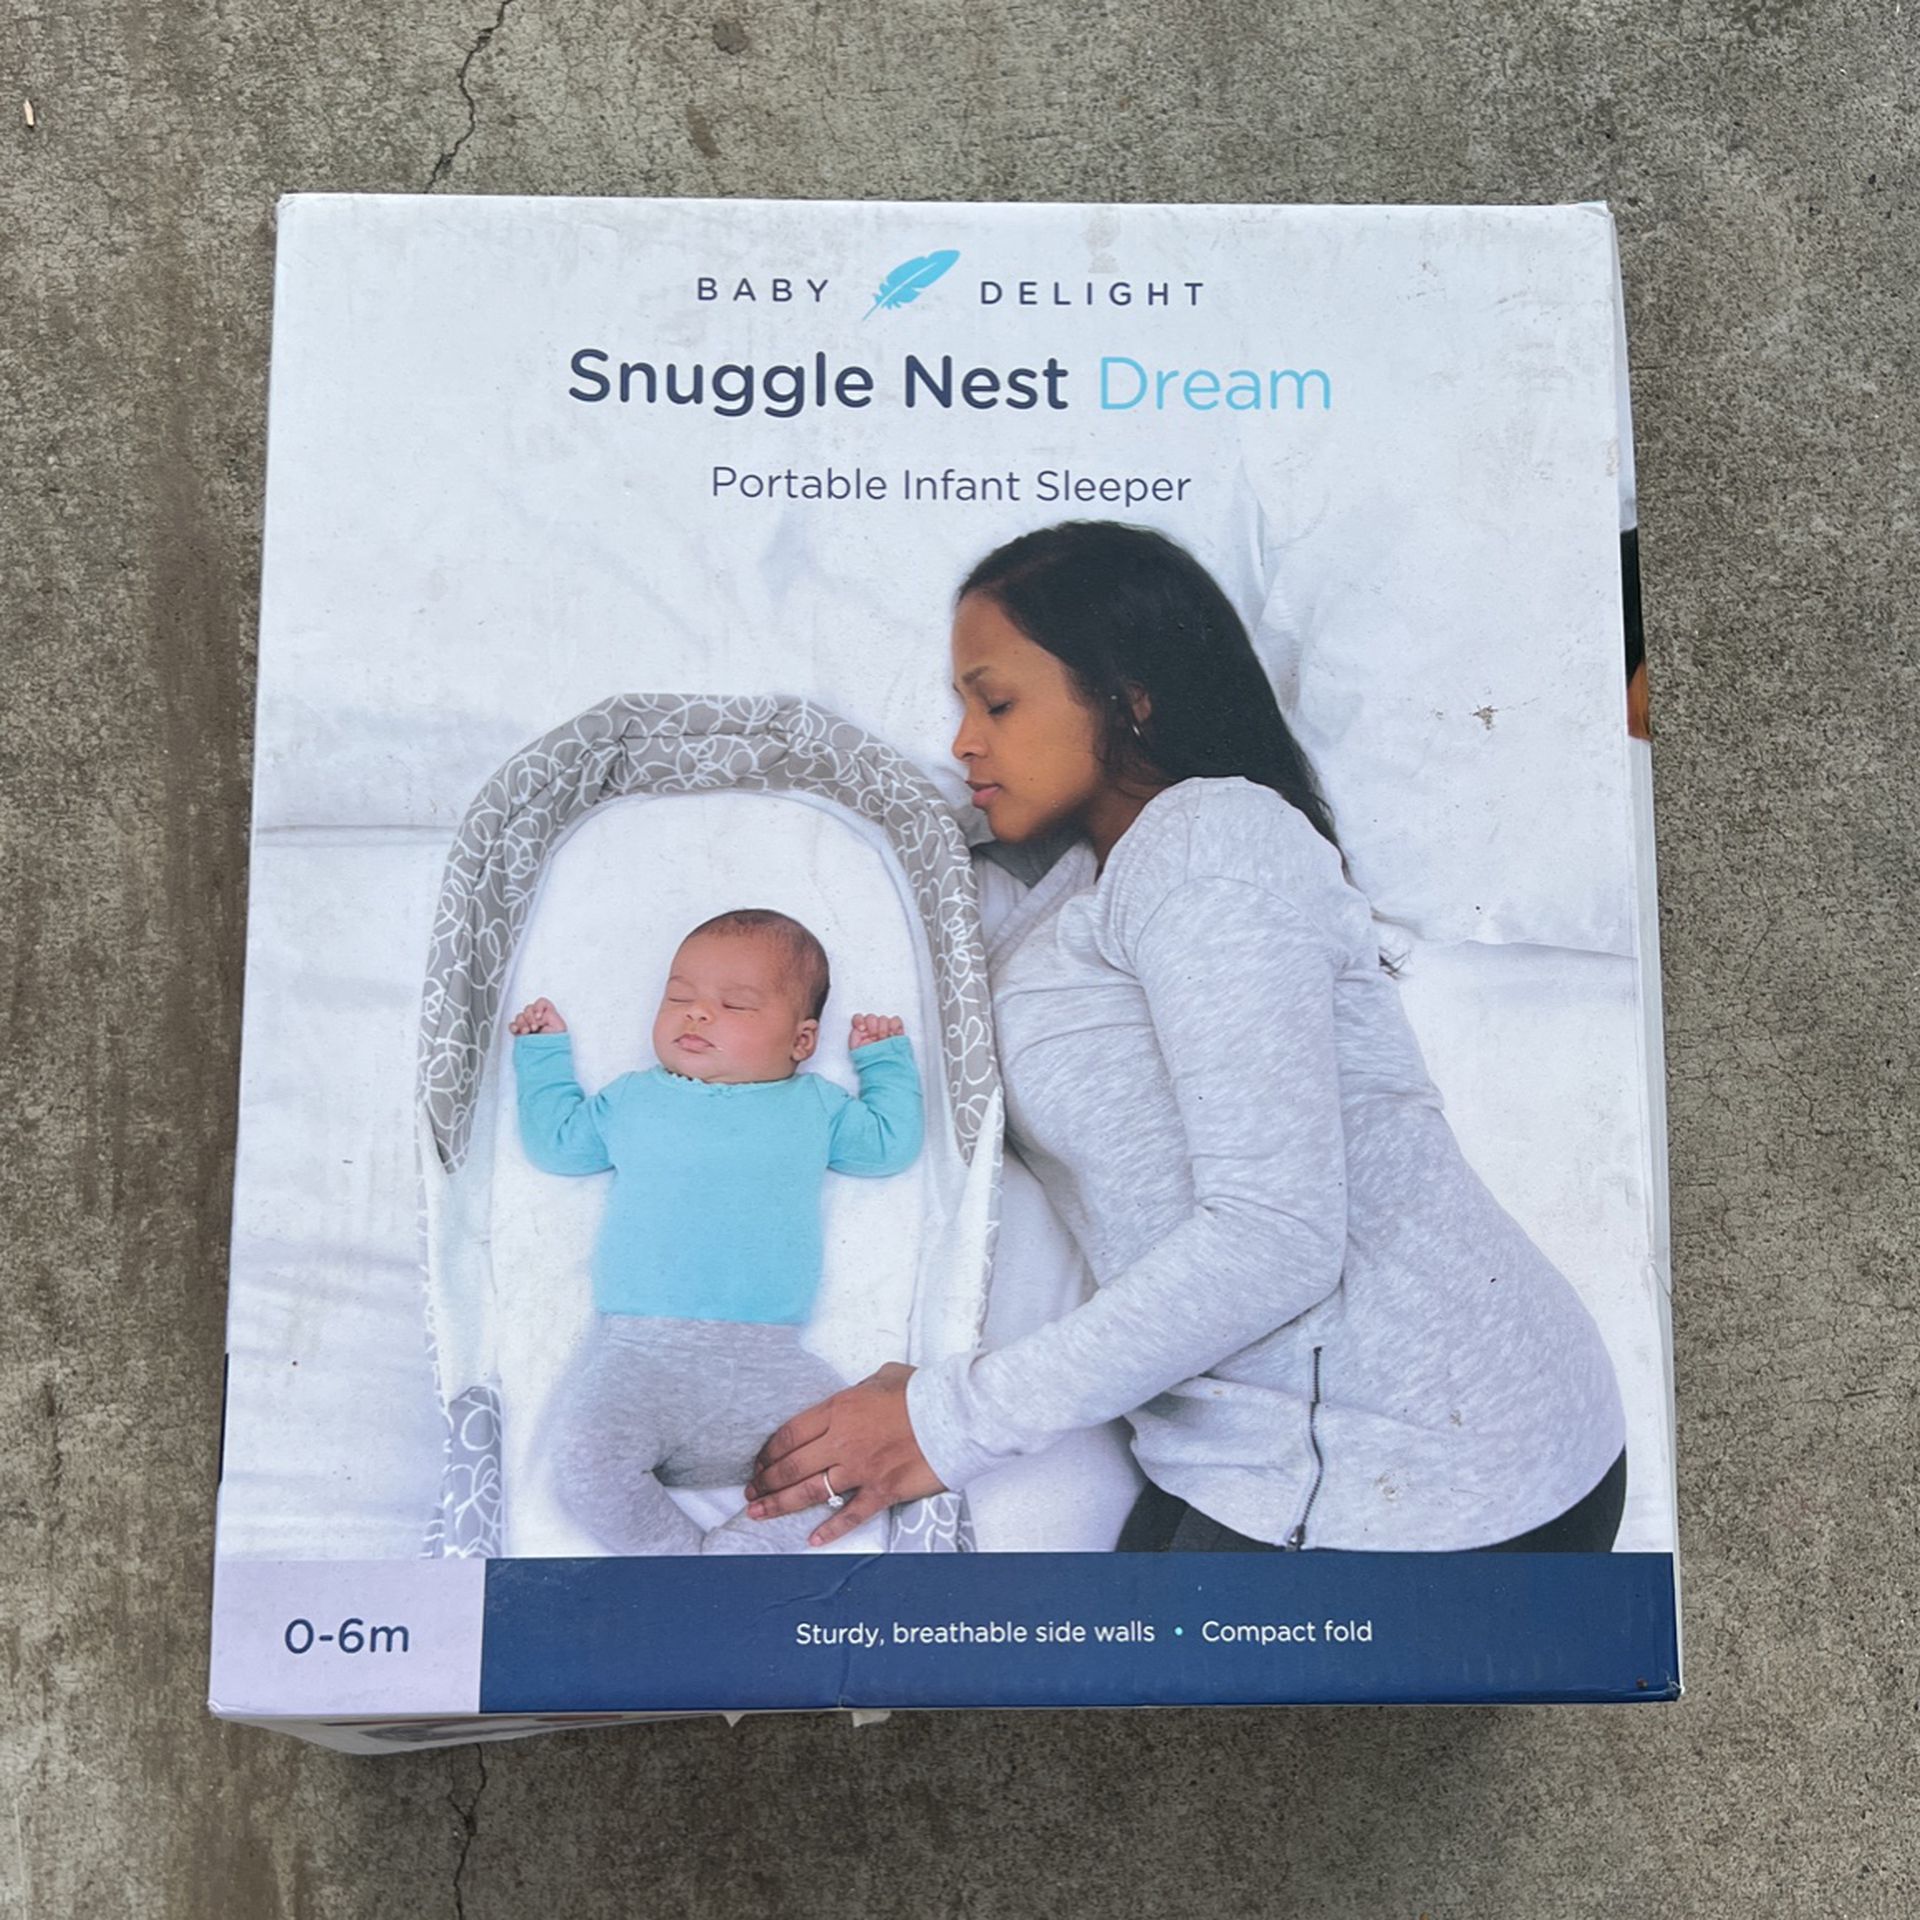 Baby Delight Snuggle Best Dream 